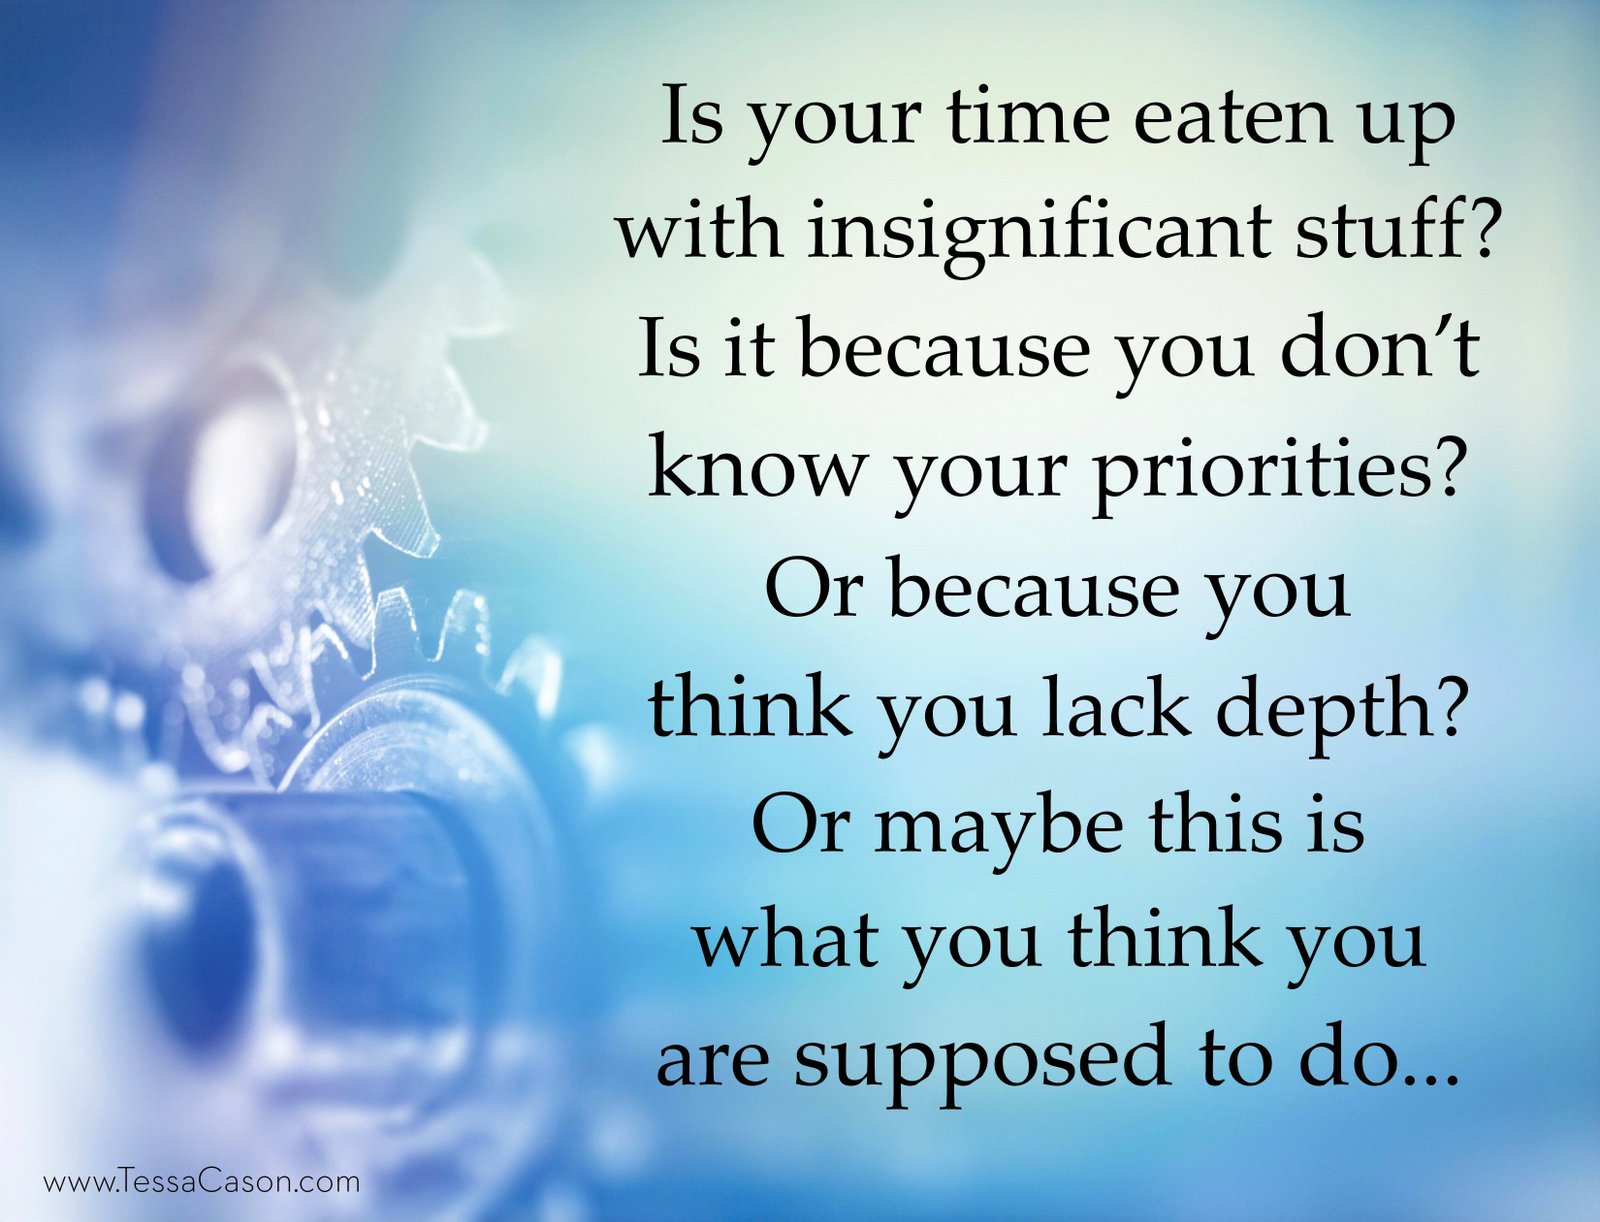 Is your time eaten up with insignificant stuff